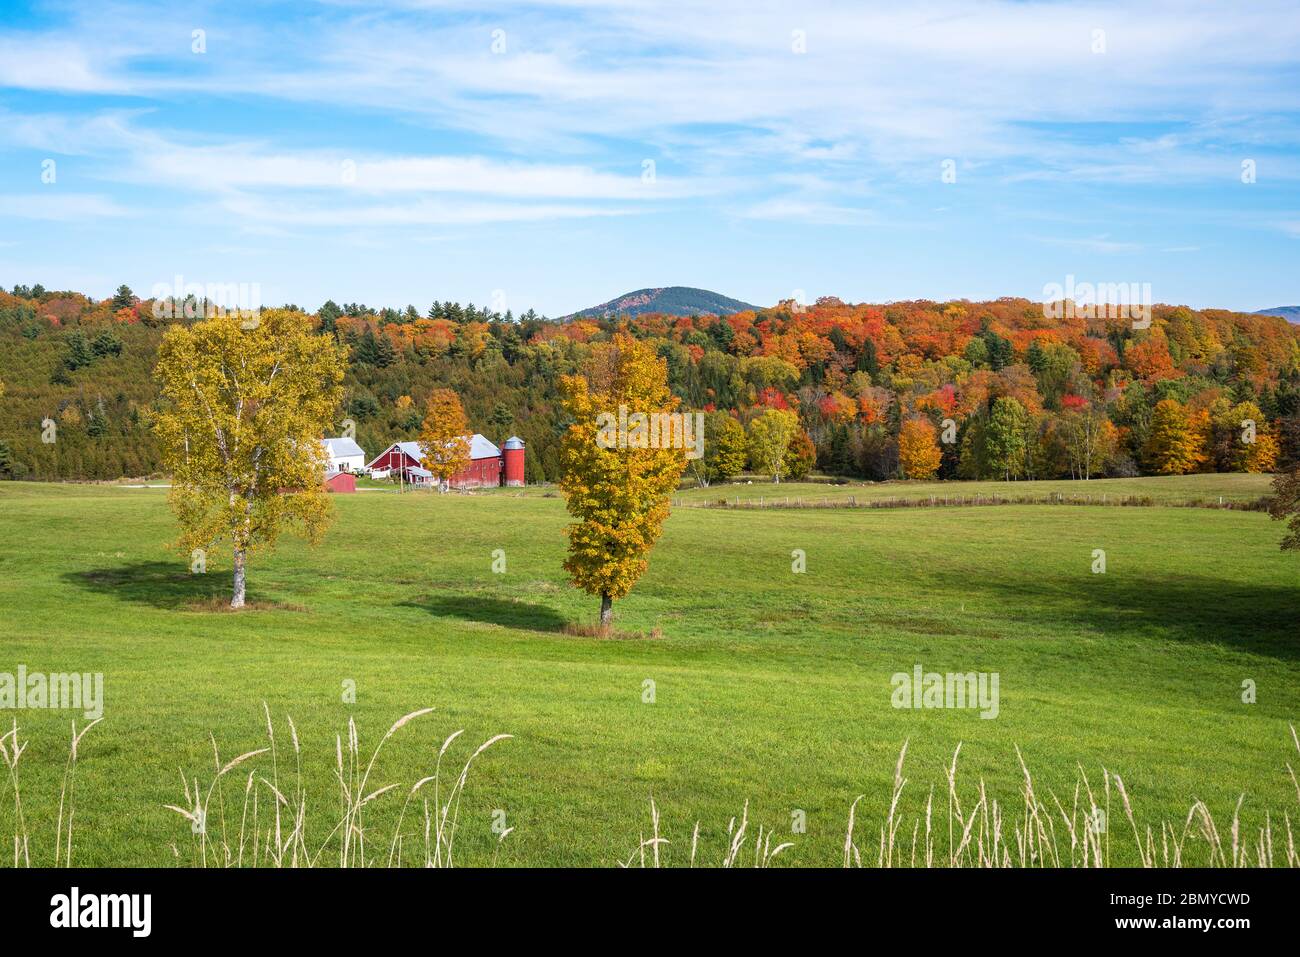 Rural landscape with a red barn with a silo at the foot of a forested hill and pasture in foreground. Beautiful autumn colours. Stock Photo